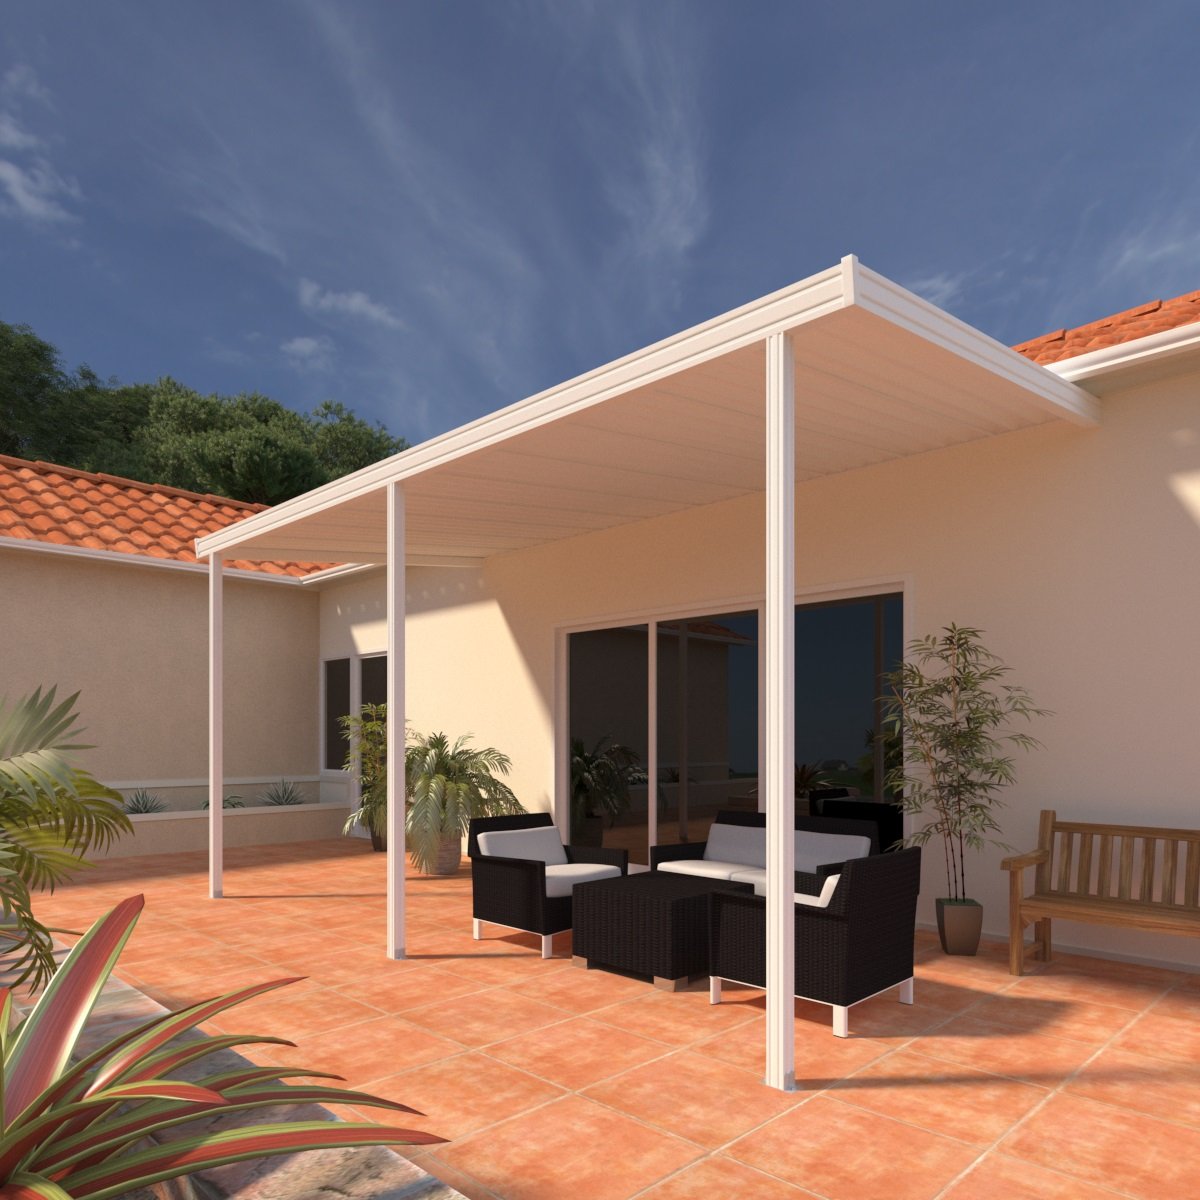 08 ft. Deep x 18 ft. Wide White Attached Aluminum Patio Cover -3 Posts - (10lb Low Snow Area)